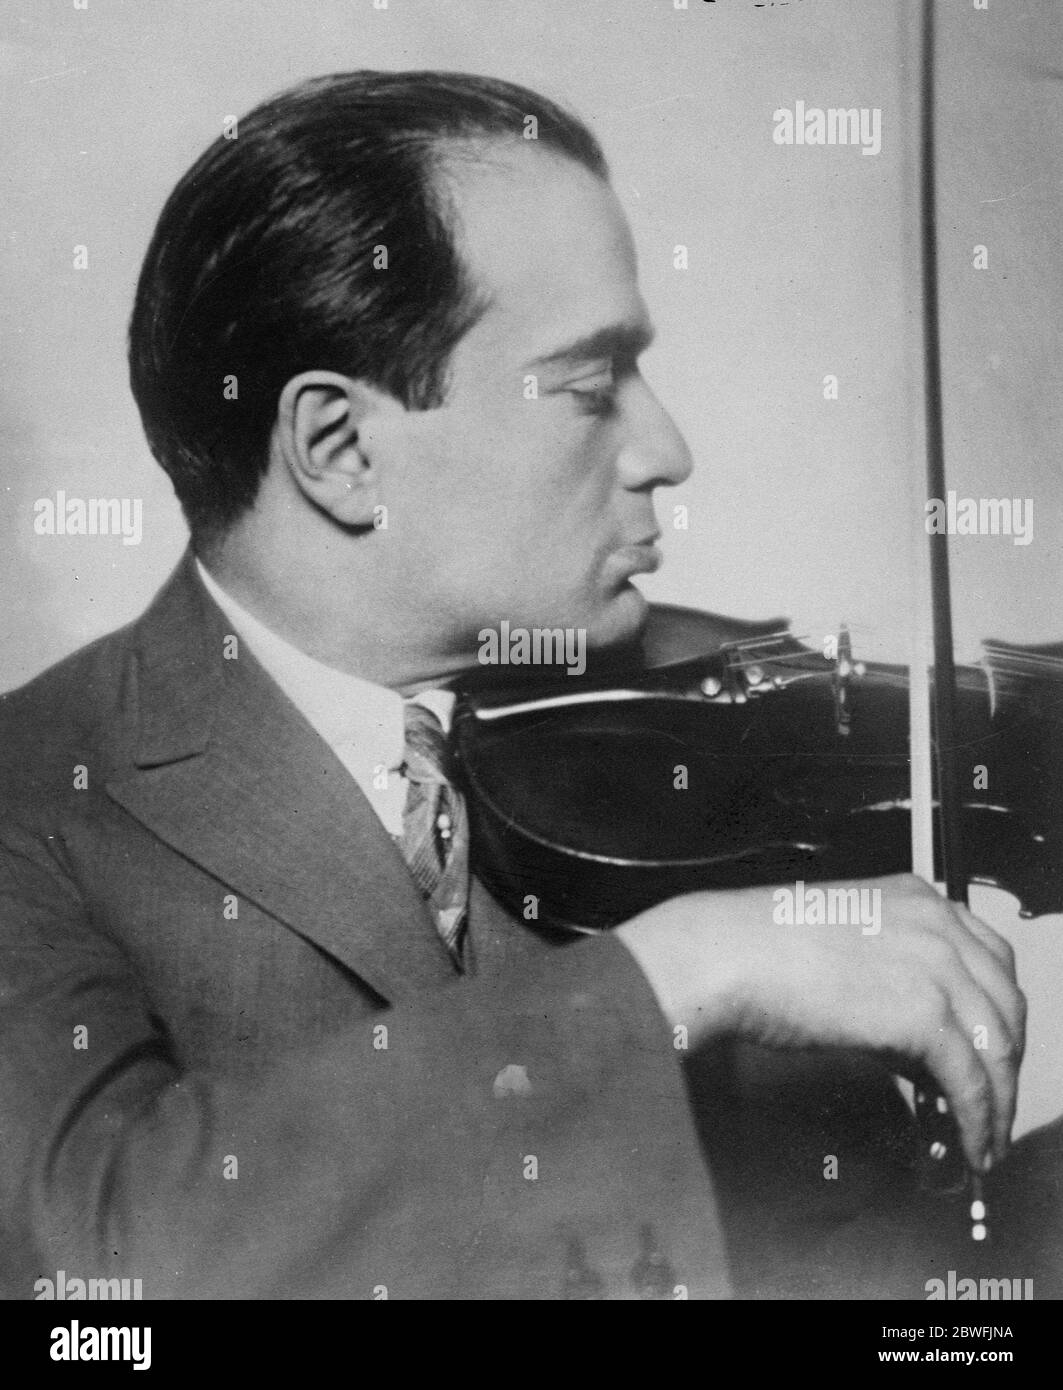 Stolen violin returned . M Bronislaw Huberman , the well known Polish violinist , whose Stradivarine , worth £20,000 was stolen from him some years ago in a Vienna Hotel . He had the instrument returned to him in a registered parcel with a polite note to the effect that as the thief had found it was unsaleable he had pleasure in returning it to its lawful owner . 18 August 1924 Stock Photo